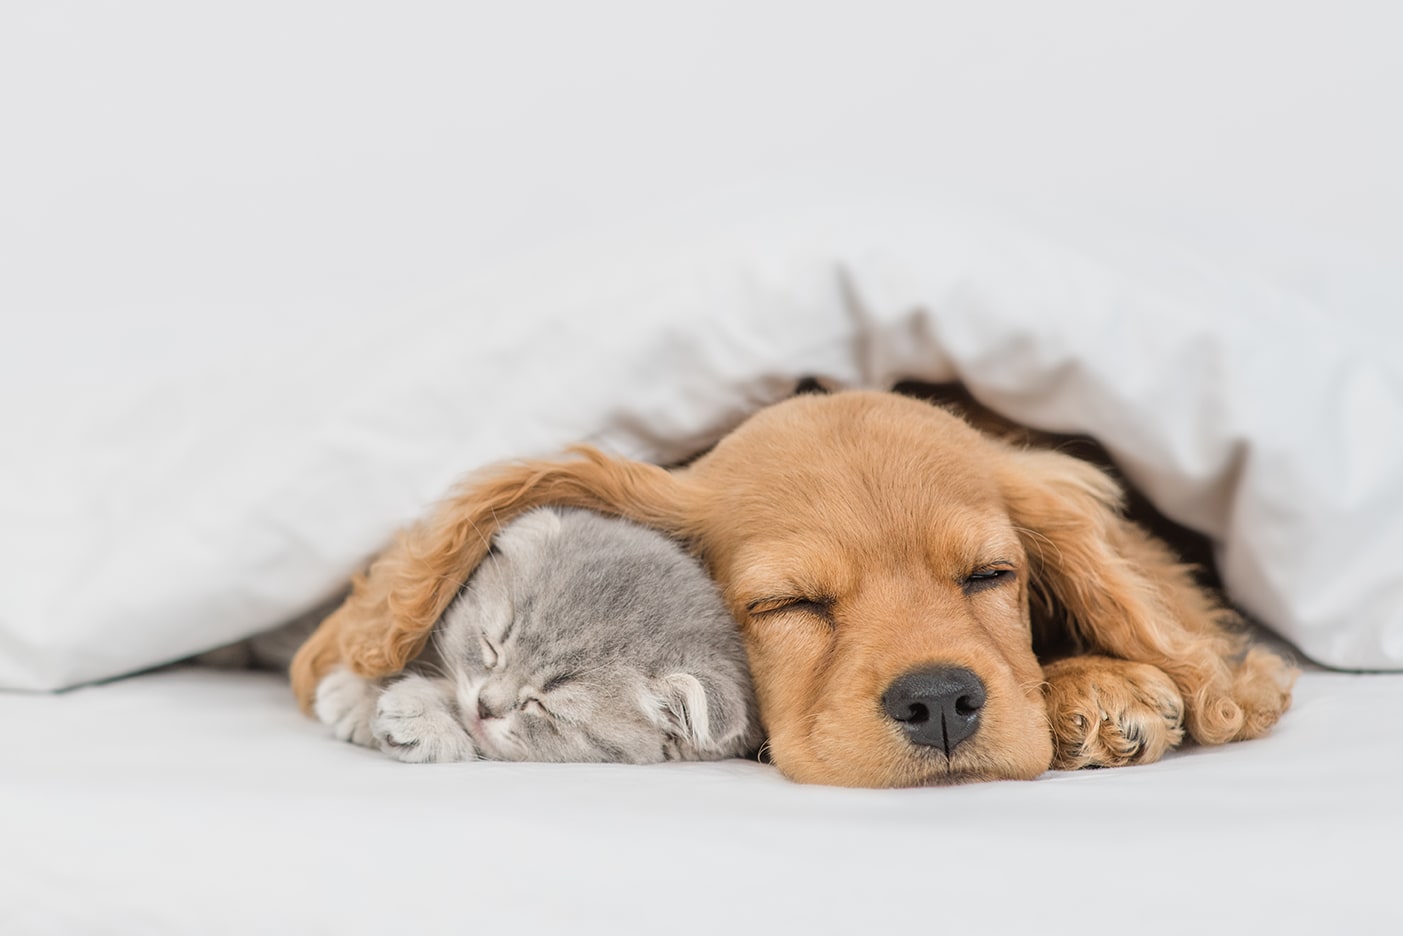 Cute spaniel puppy and kitten sleeping together under a white duvet.